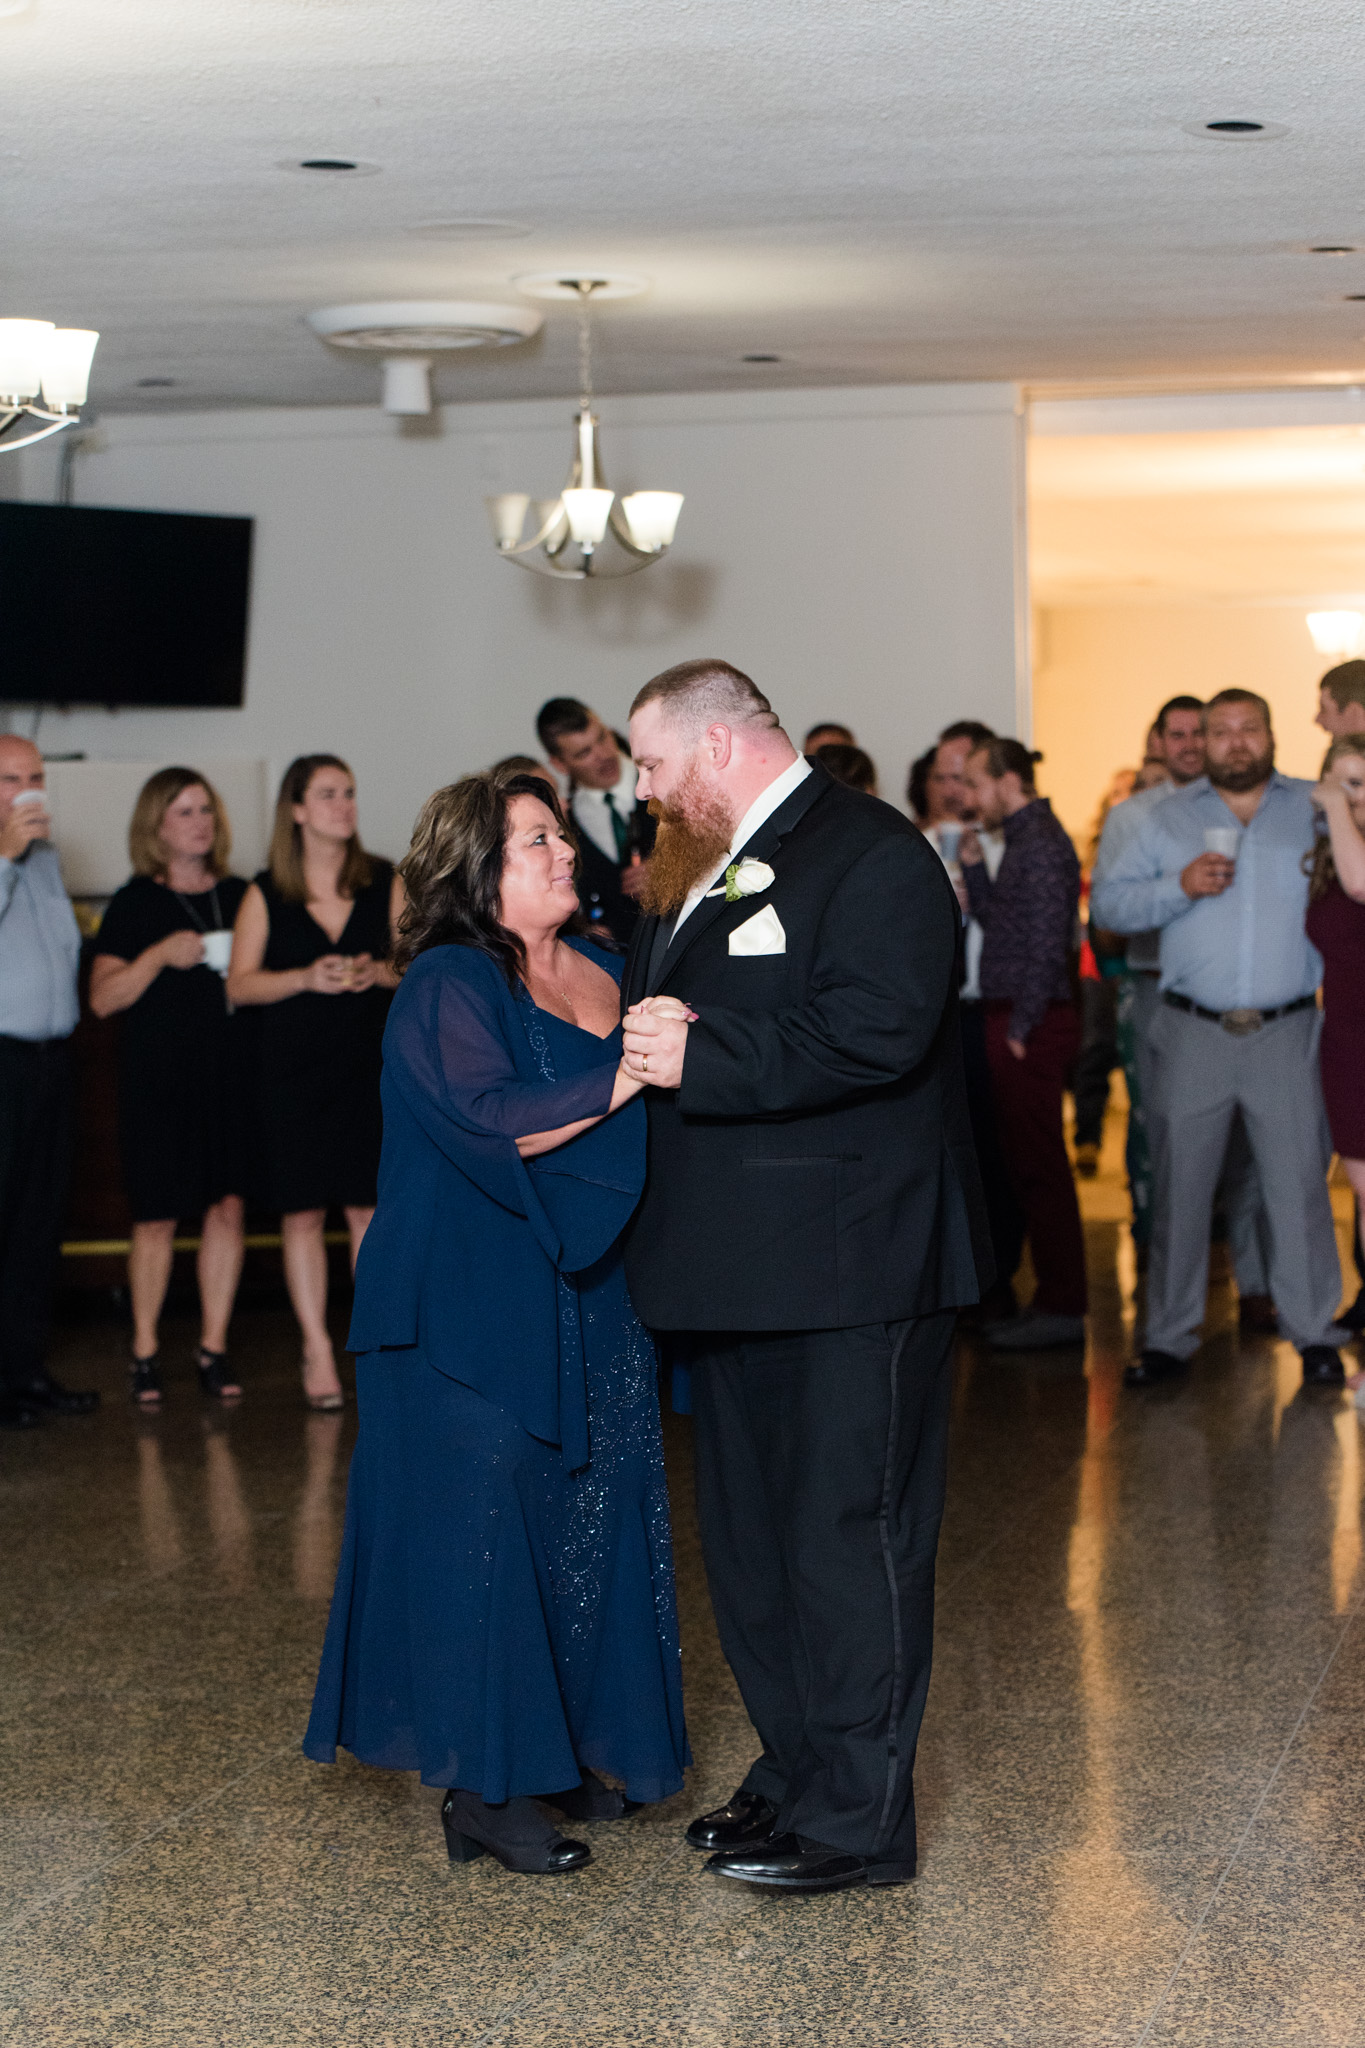 Groom and mother dance during wedding reception.